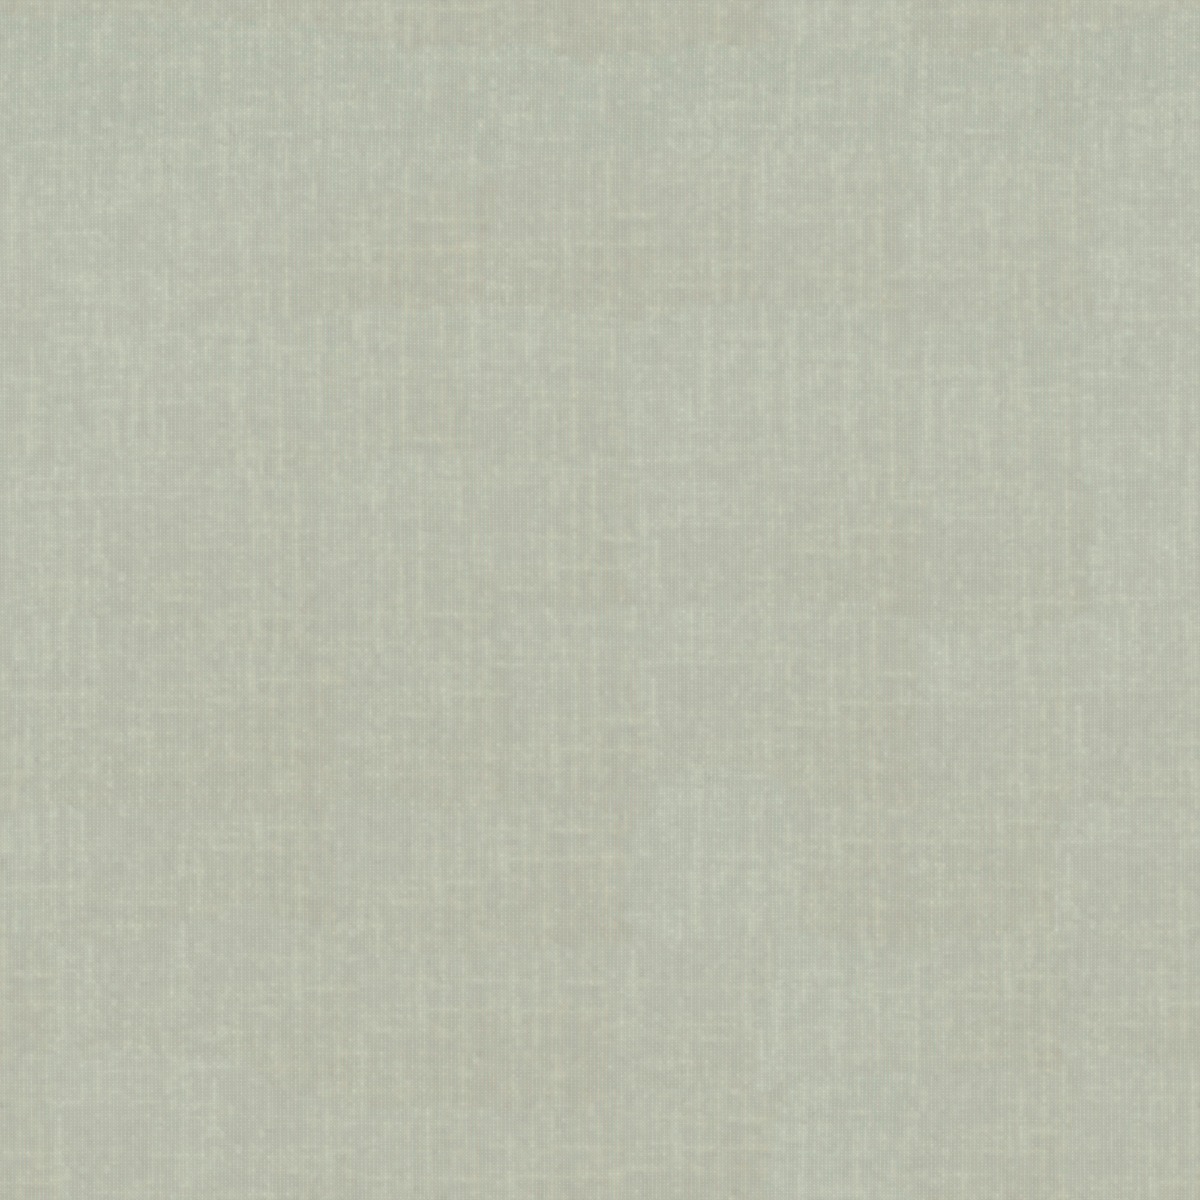 A seamless fabric texture with plain green sheer units arranged in a None pattern